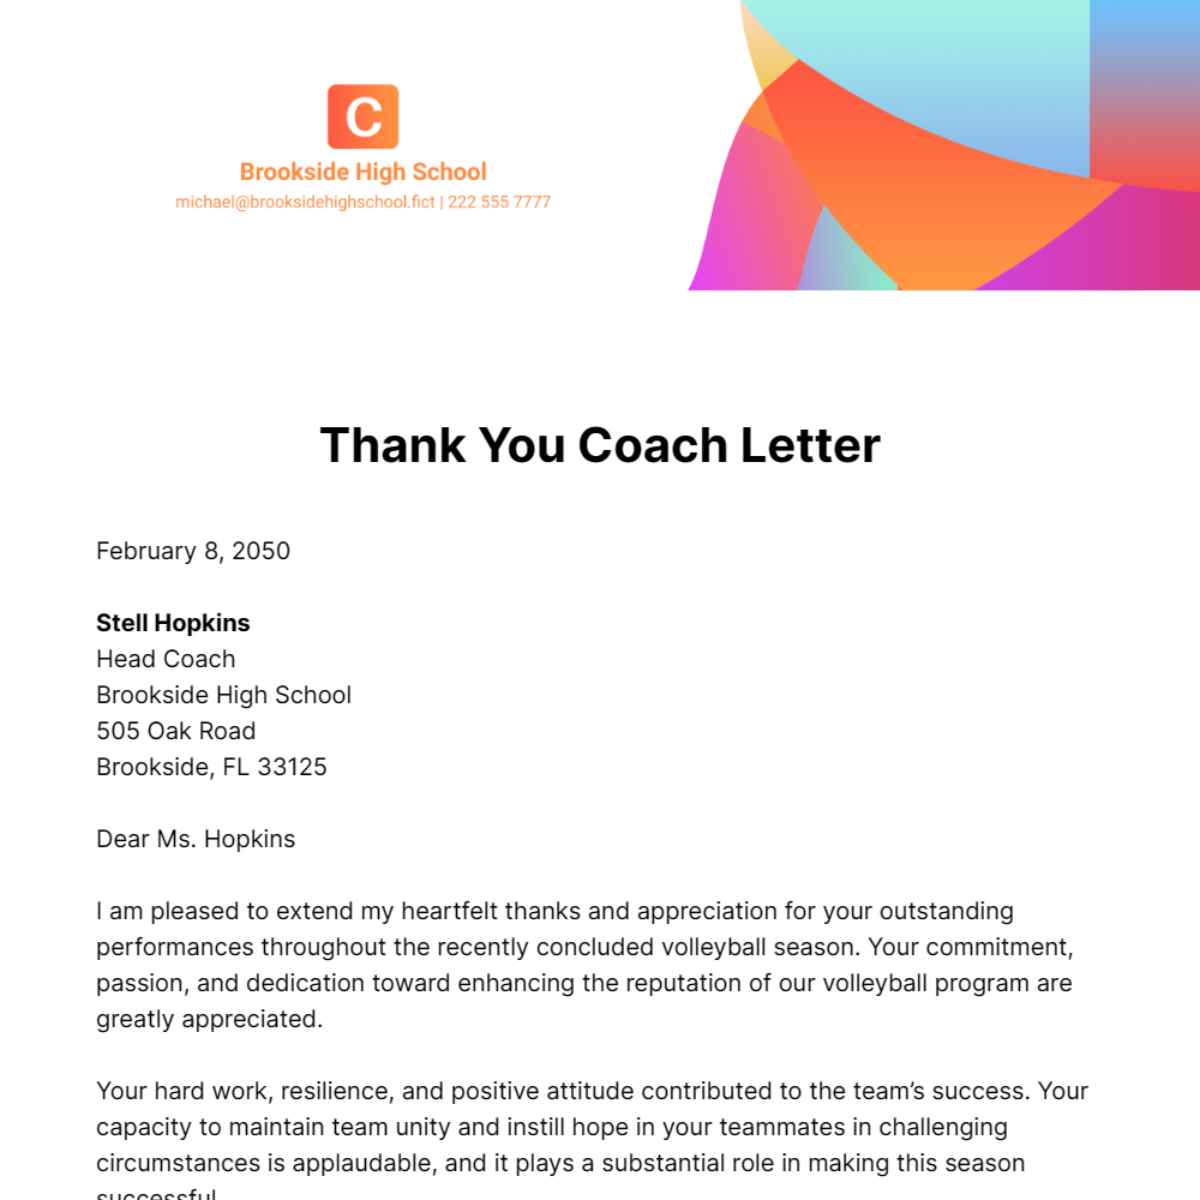 Thank you Coach Letter   Template